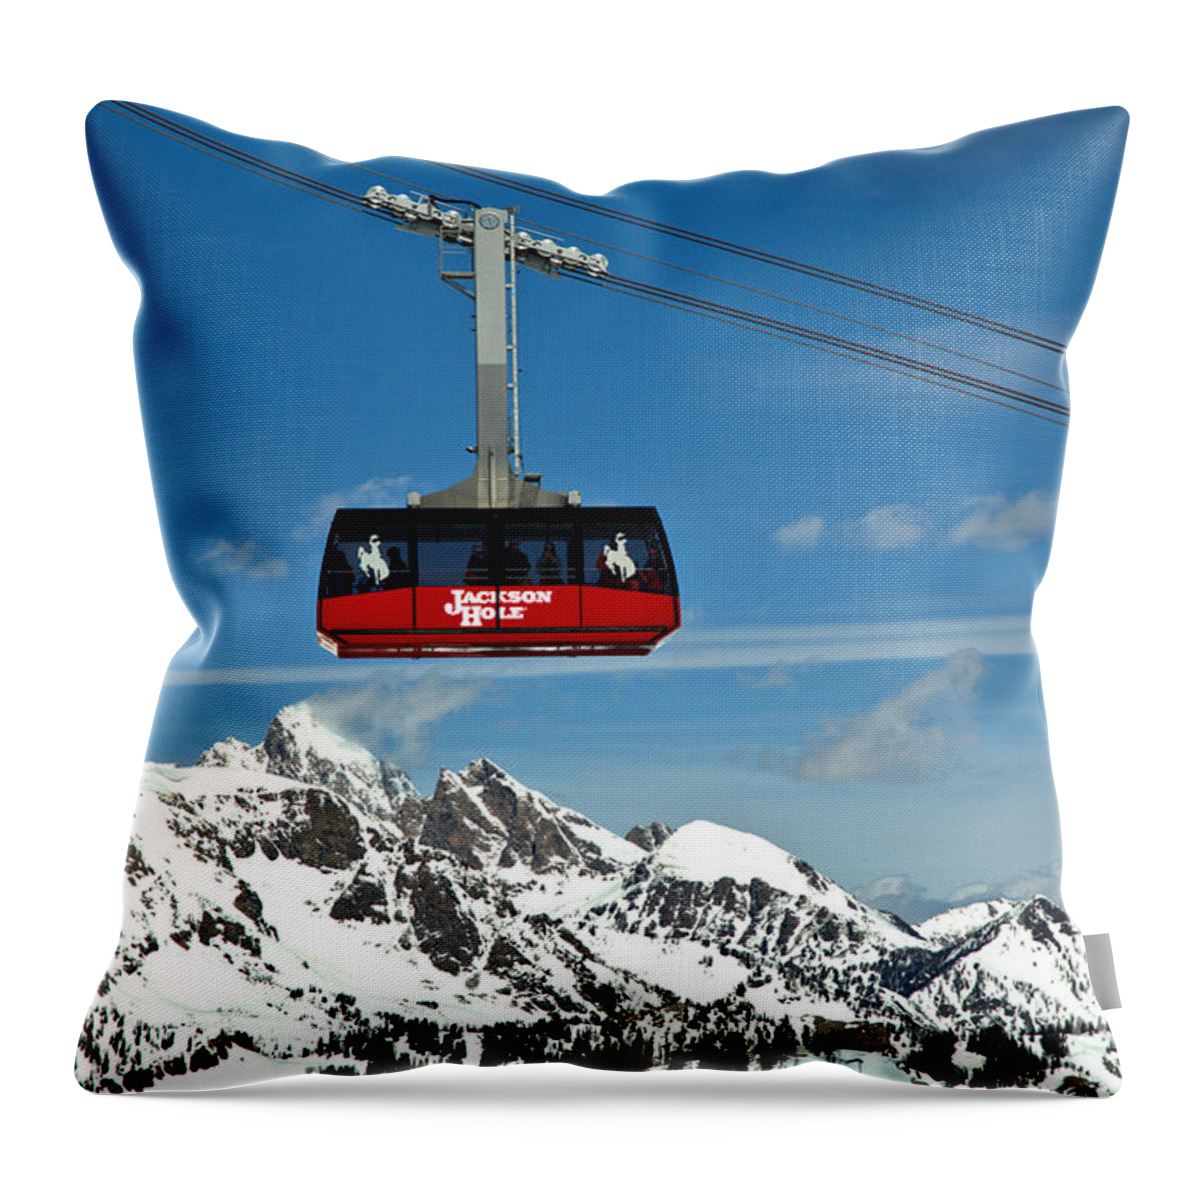 Jackson Hole Tram Throw Pillow featuring the photograph Jackson Hole Tram Over The Snow Caps by Adam Jewell